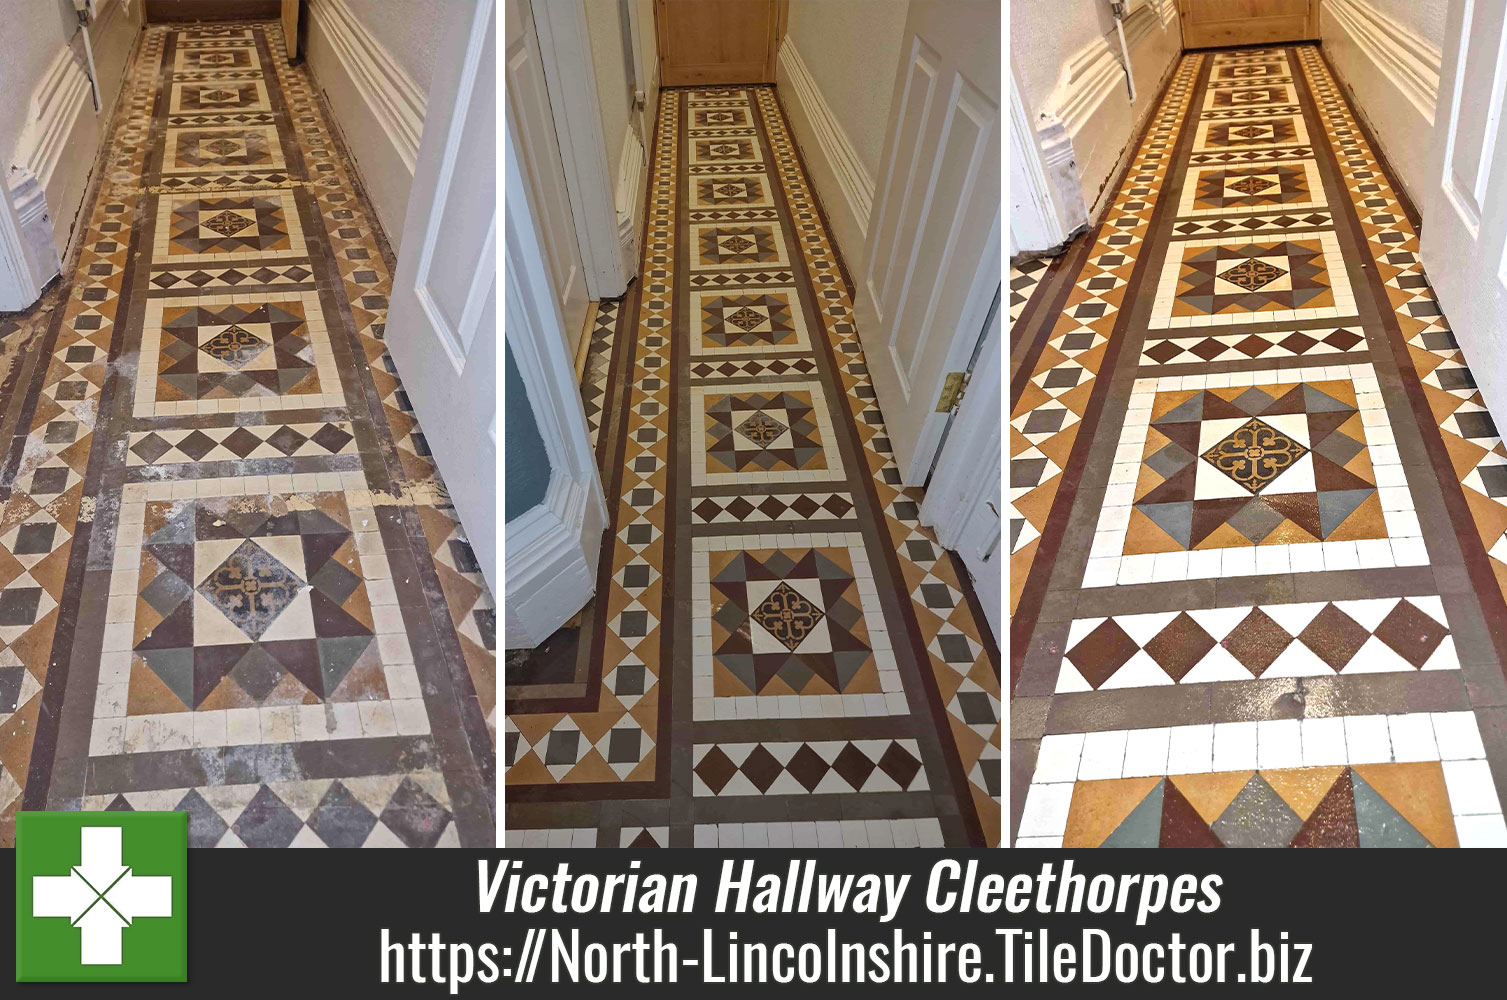 Removing Glue from Victorian Tiled Flooring with Tile Doctor Remove and Go in Cleethorpes Lincs